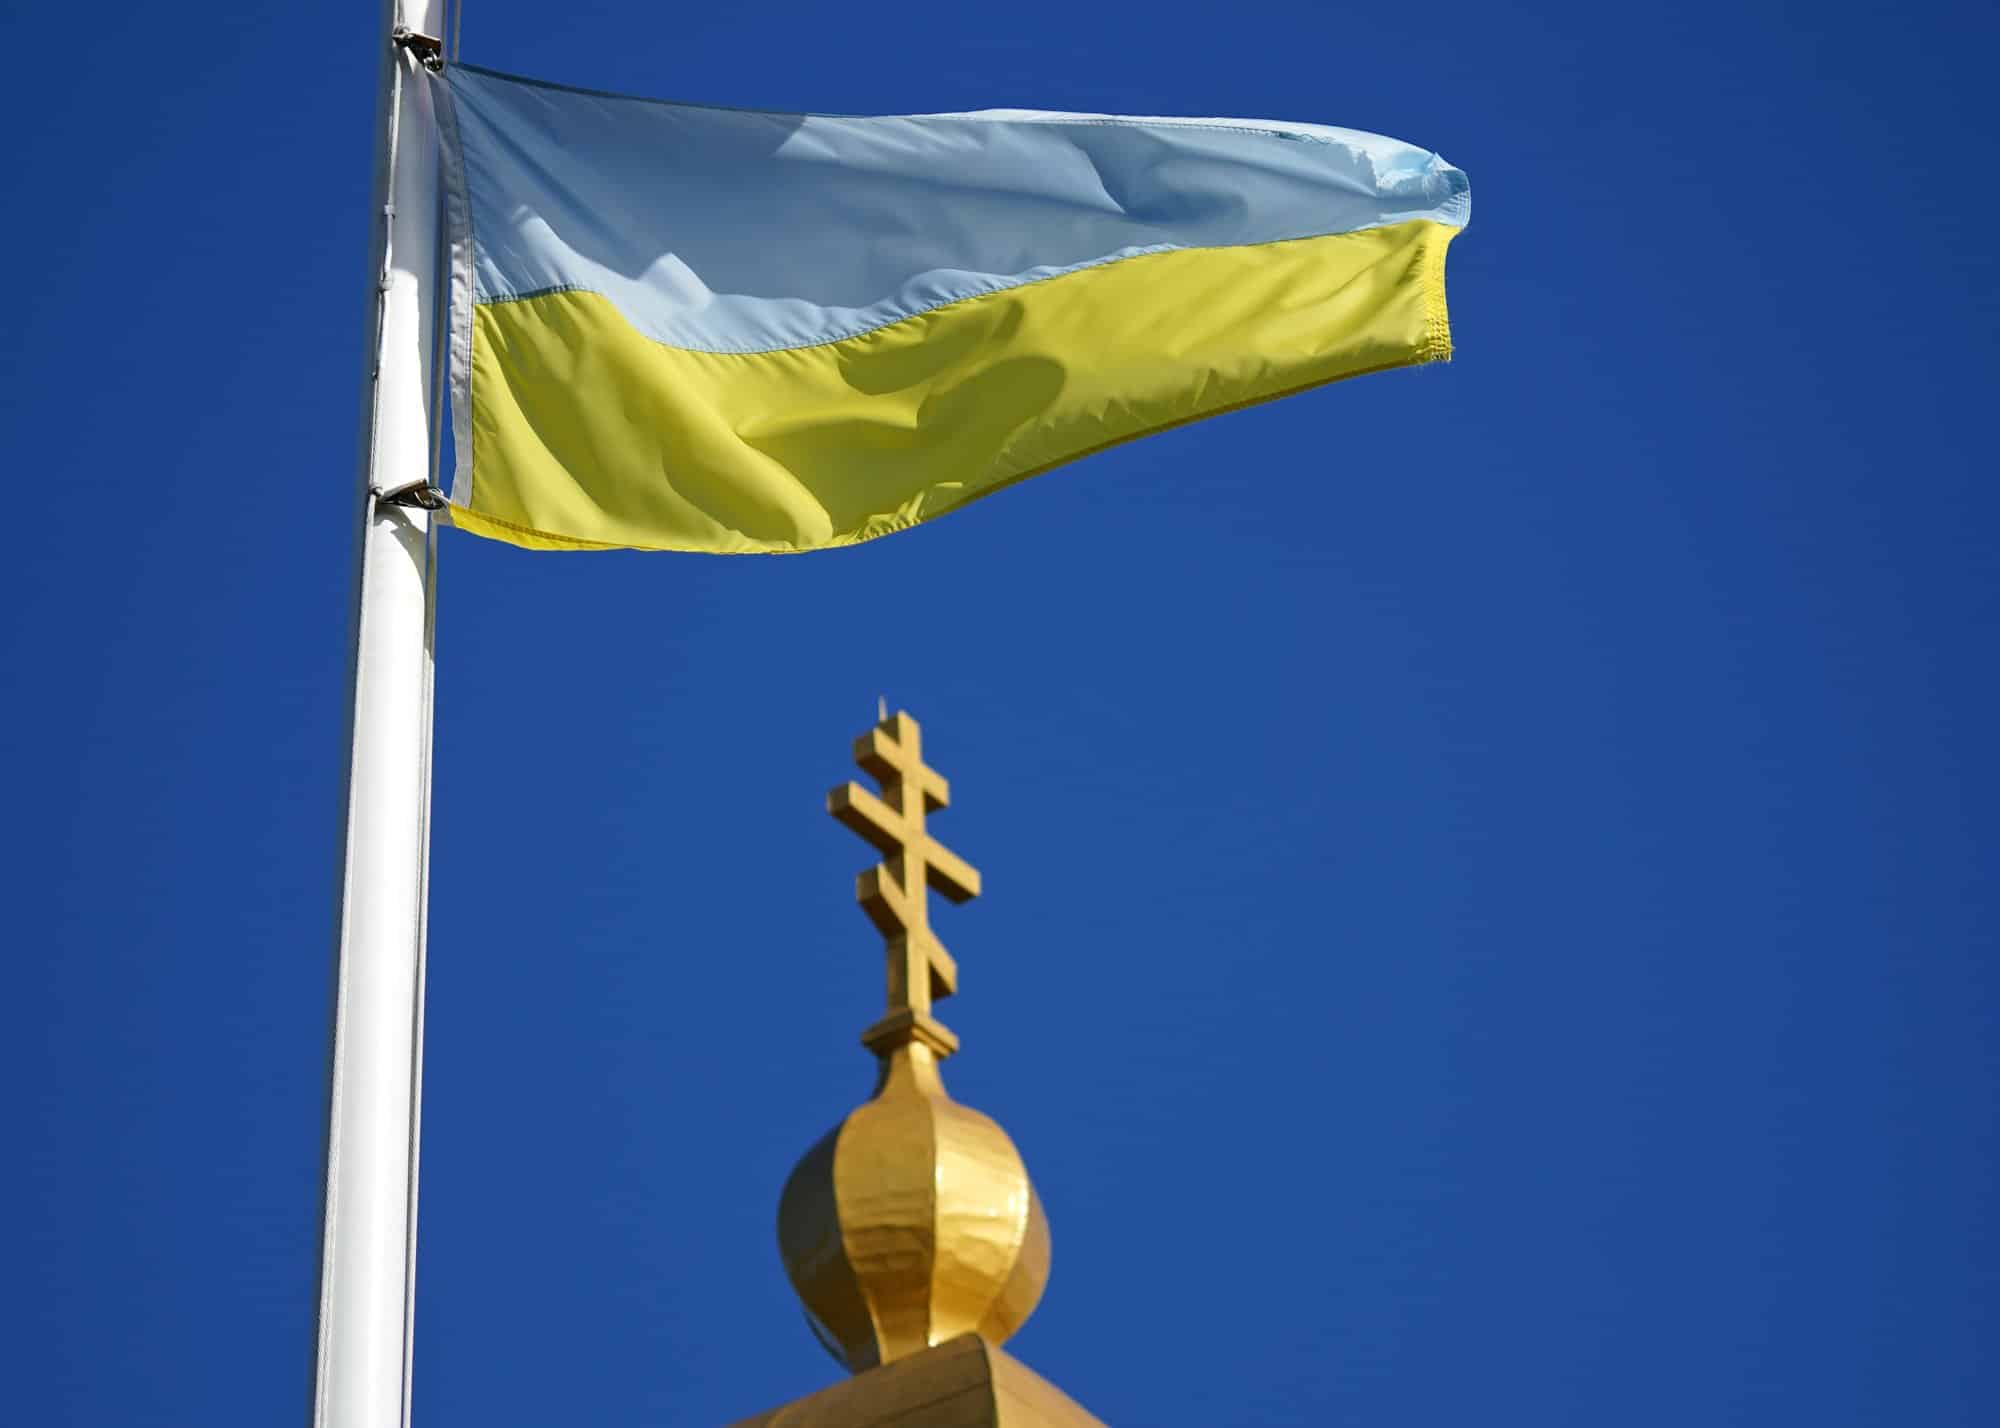 The flag of Ukraine is seen outside St. John the Baptist Ukrainian Catholic Church in Riverhead, N.Y., in 2021. (CNS photo/Gregory A. Shemitz)